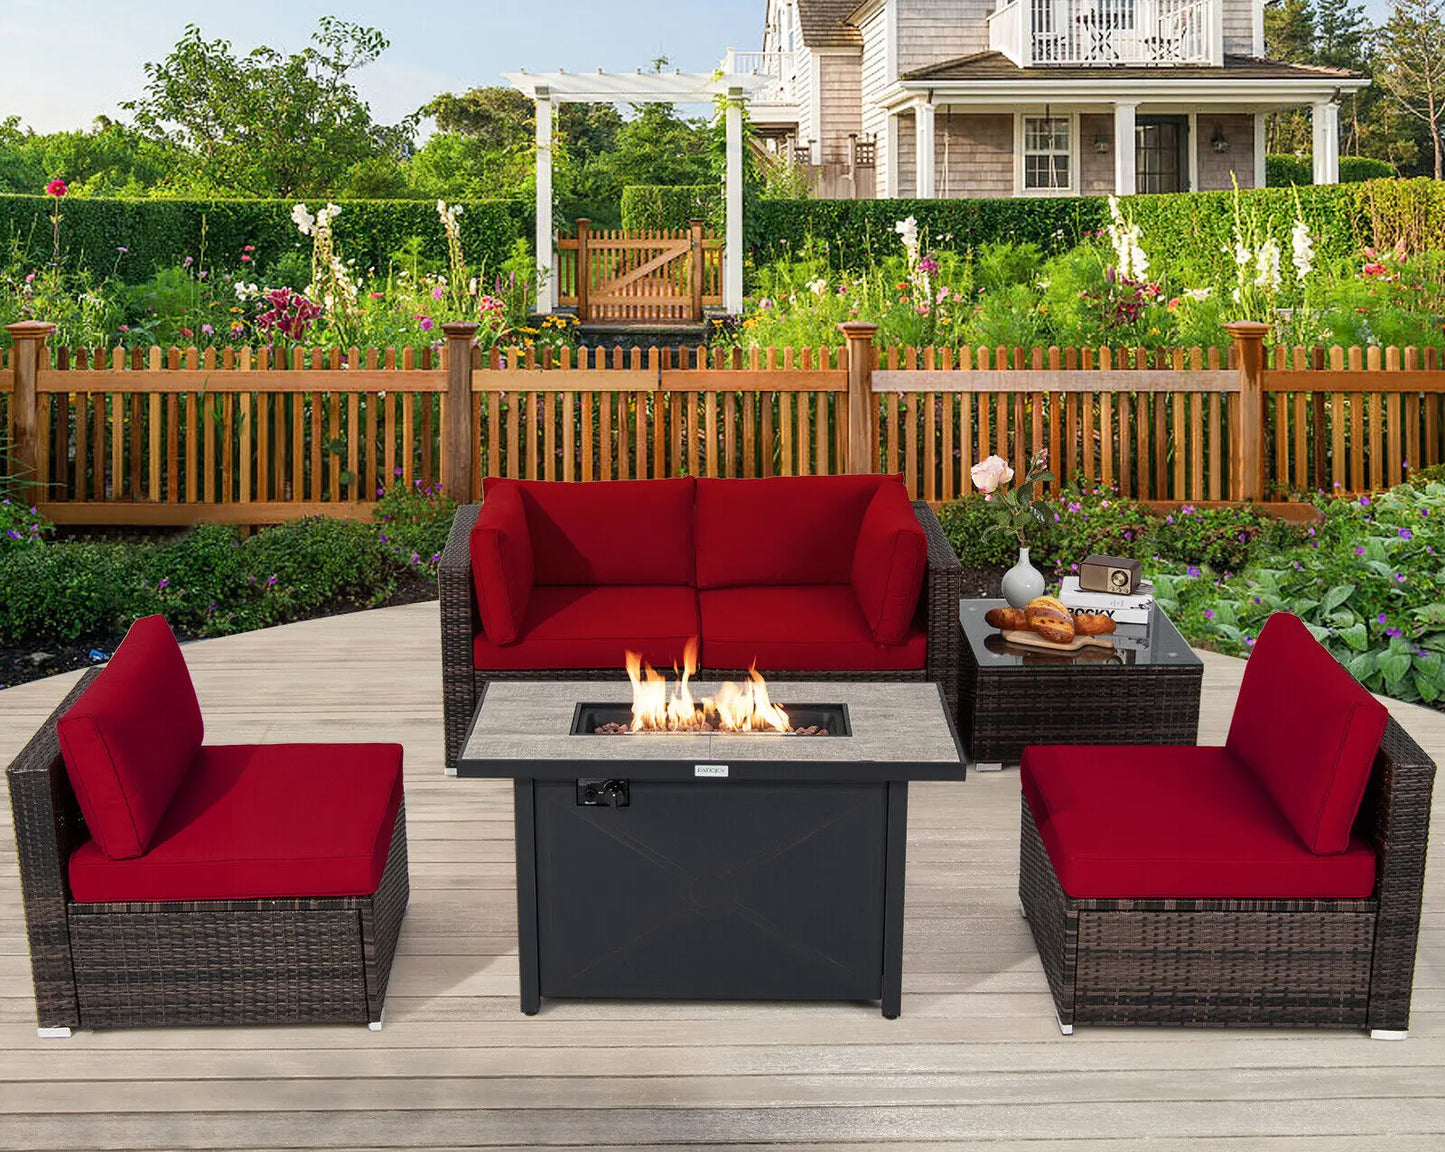 Patiojoy 6PCS Patio Furniture Set Rattan Cushioned Sofa Gas Fire Pit Table Red